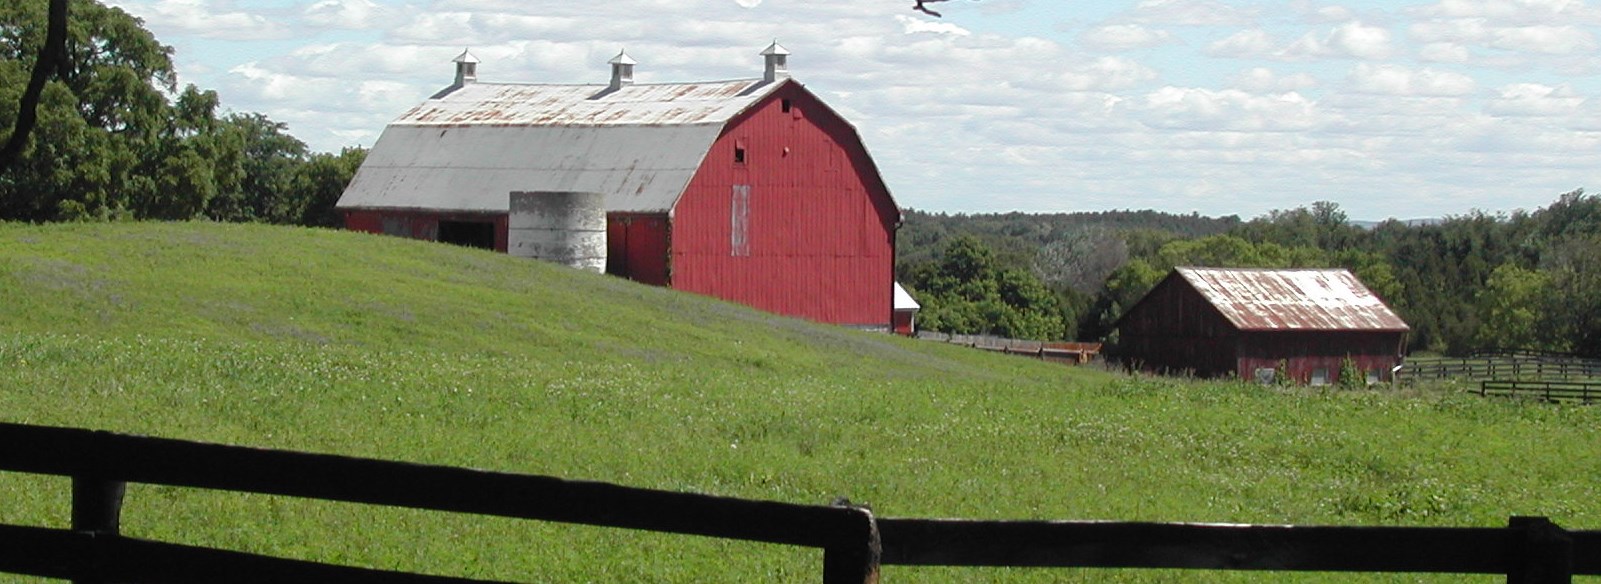 Farm in the Caledon countryside